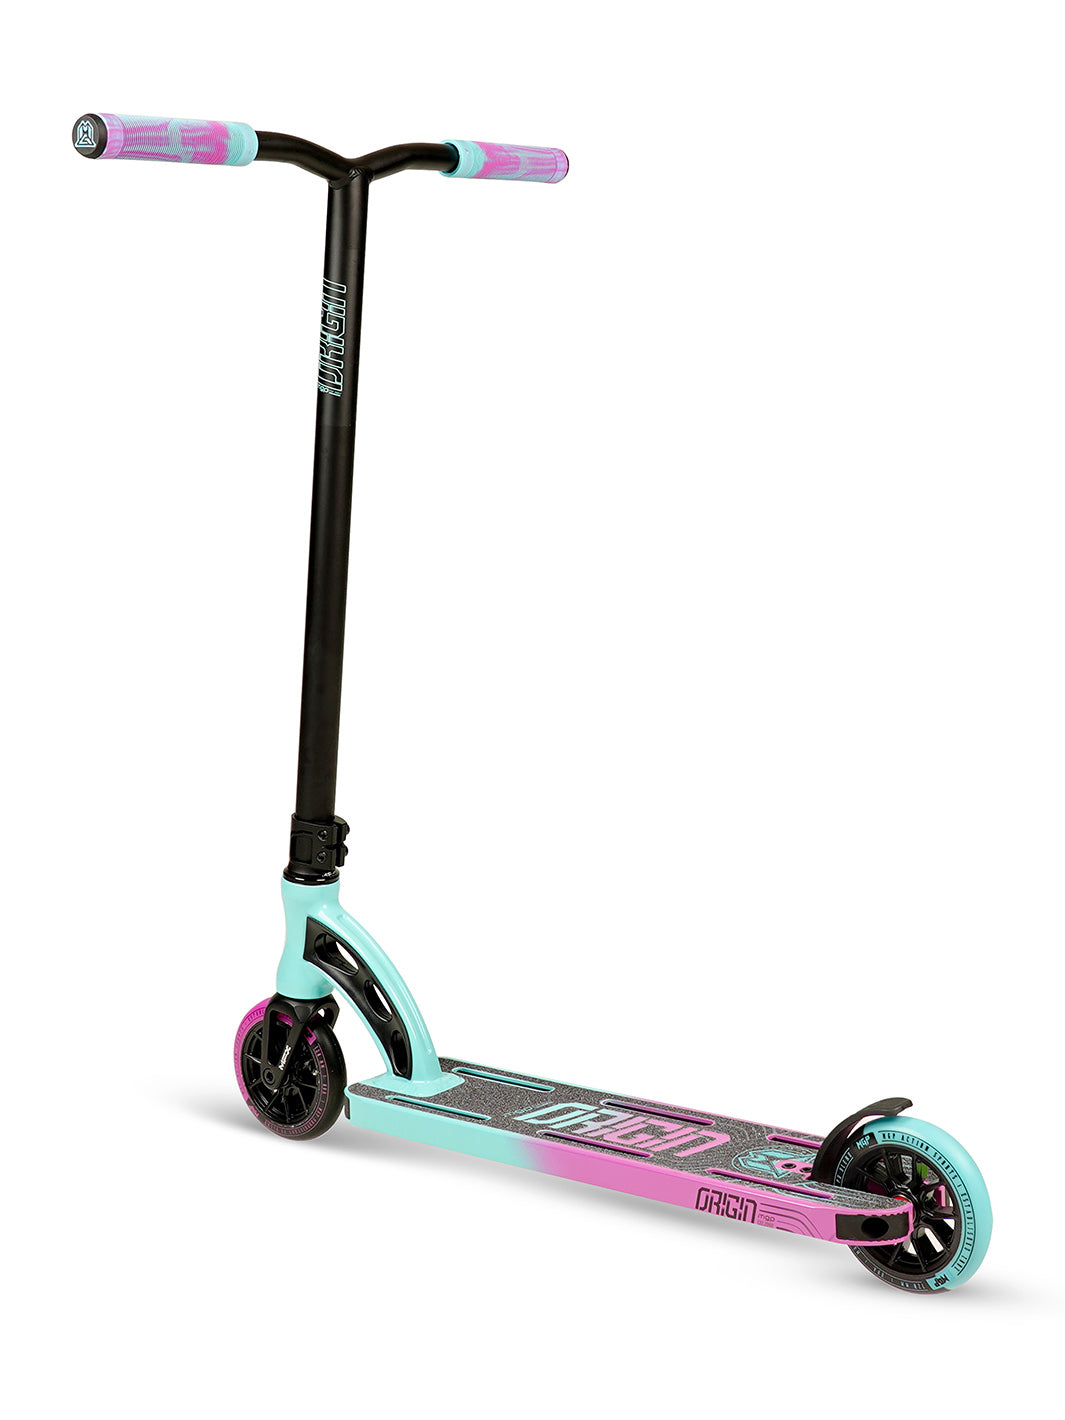 Madd Gear MGP Origin Pro Teal Pink Complete Scooter Best